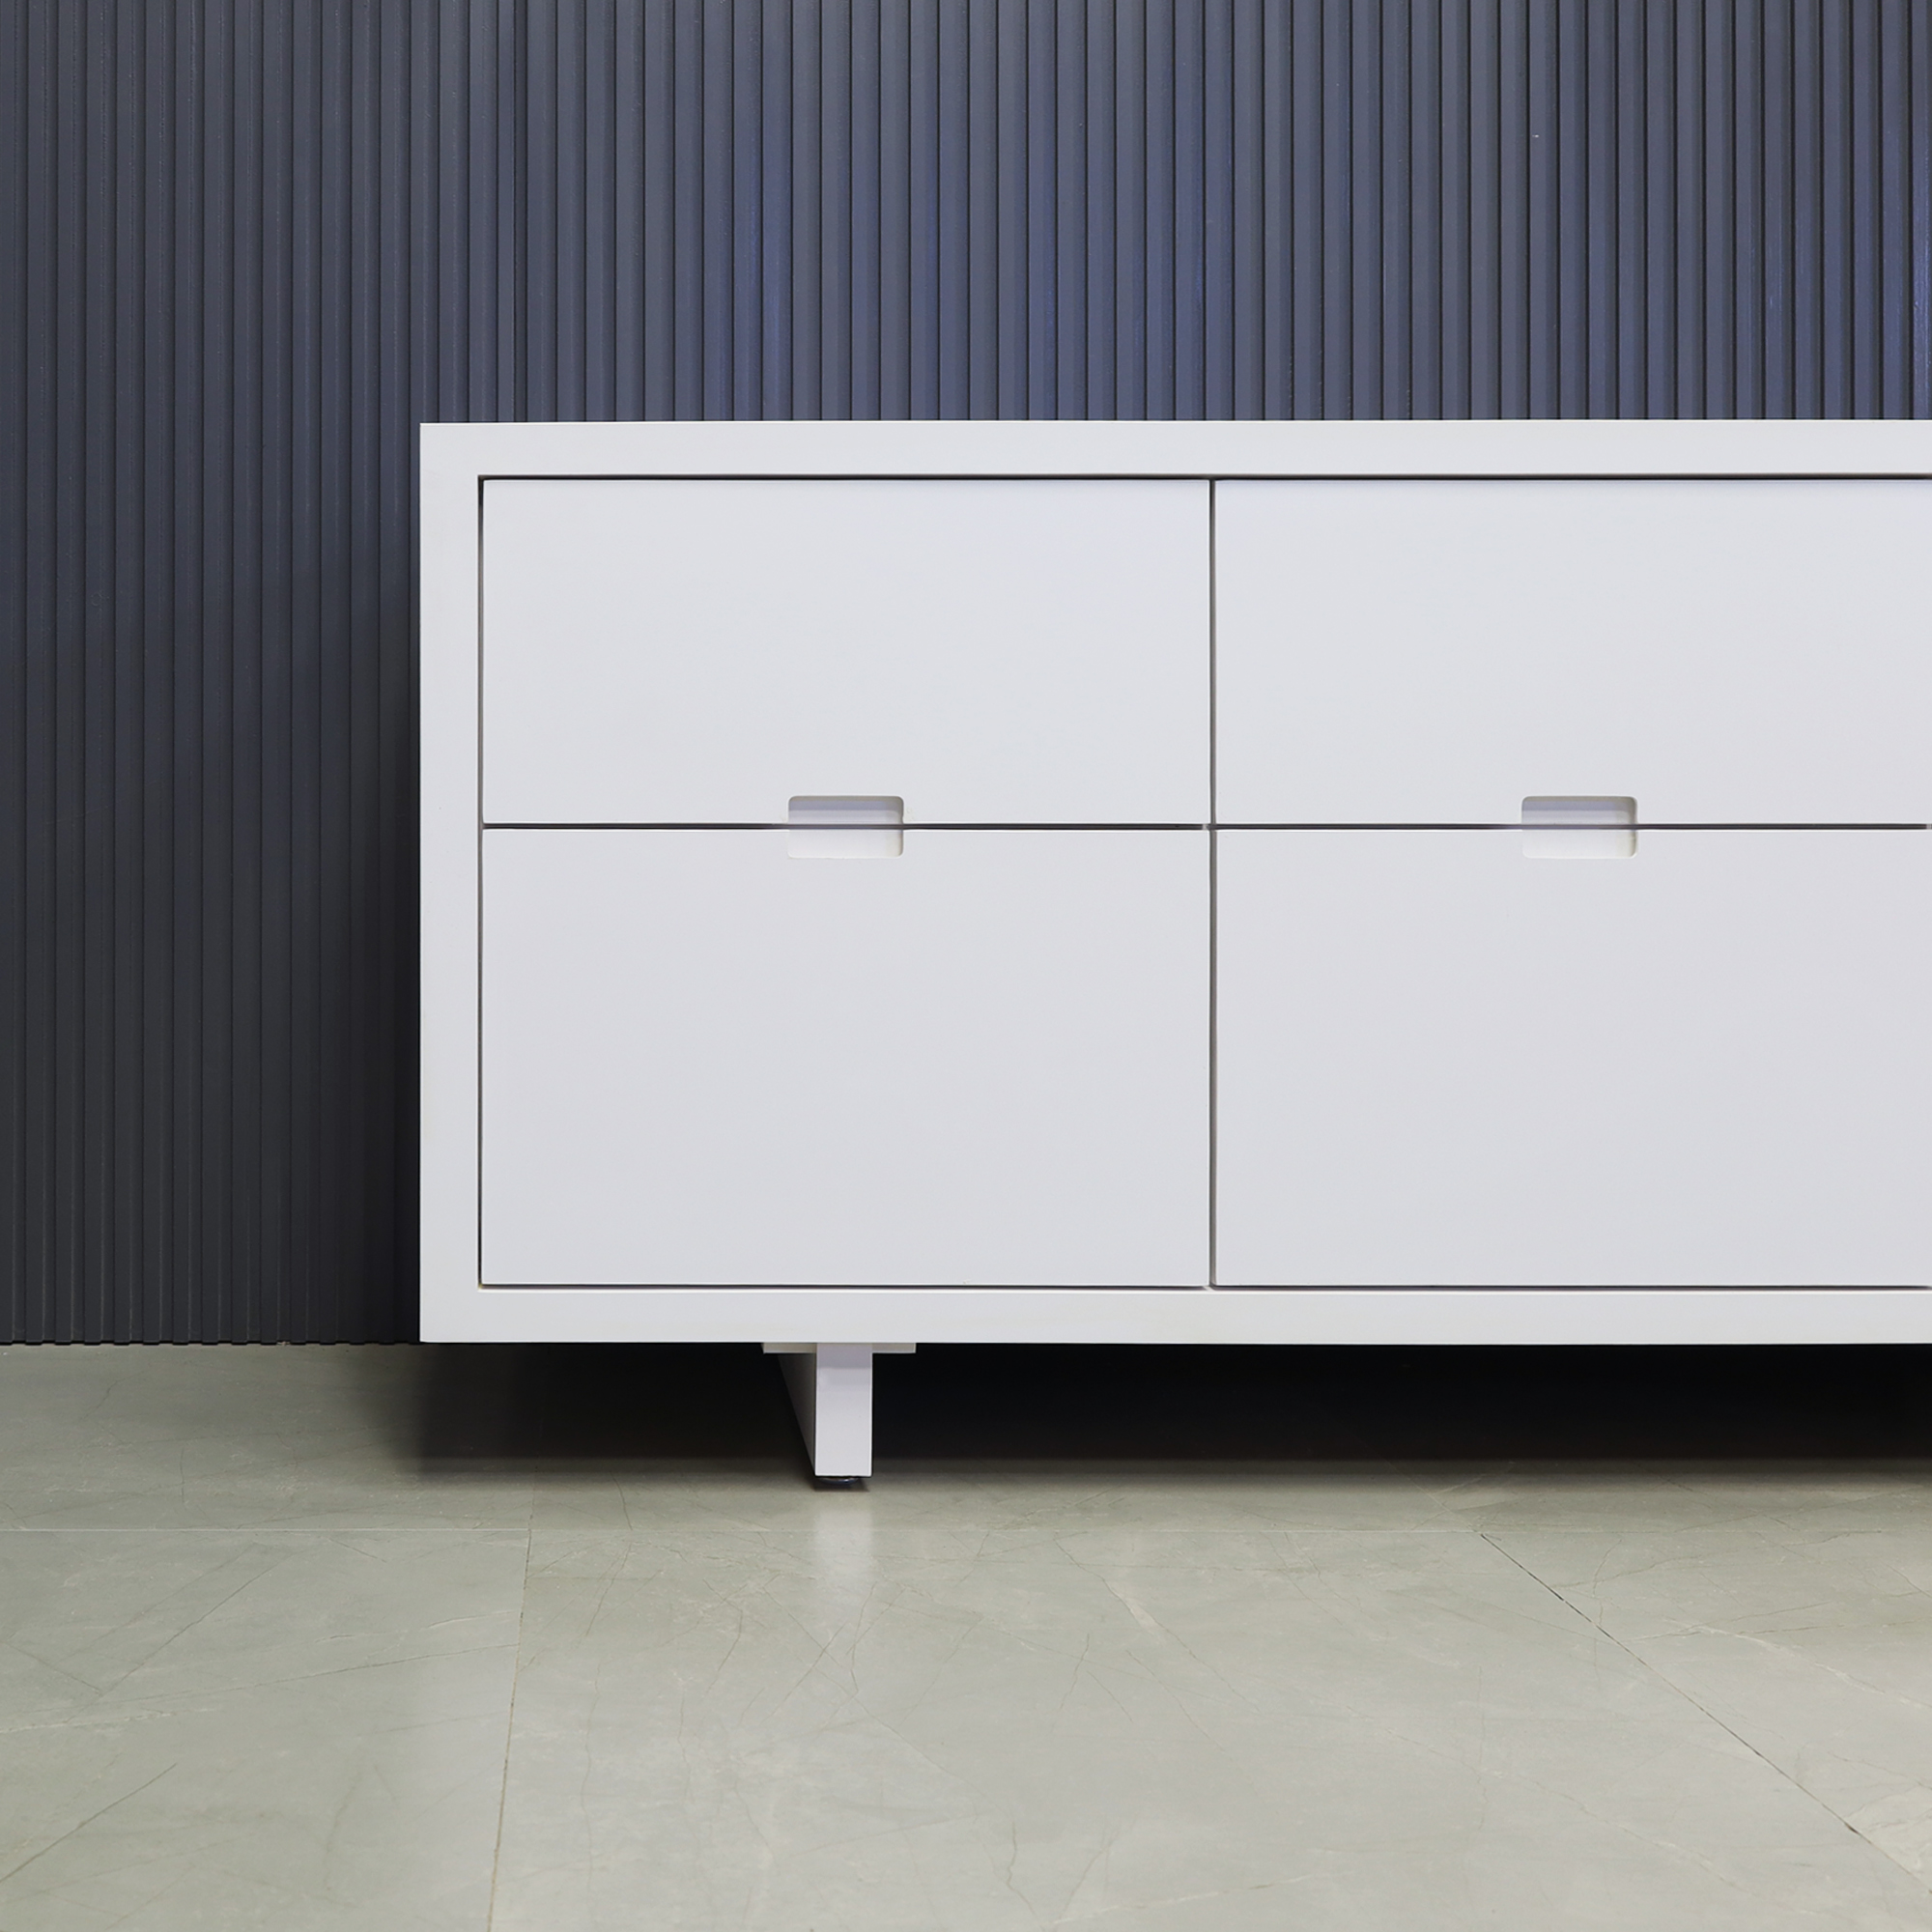 60-inch Seattle storage credenza in white matte laminate credenza and doors, shown here.